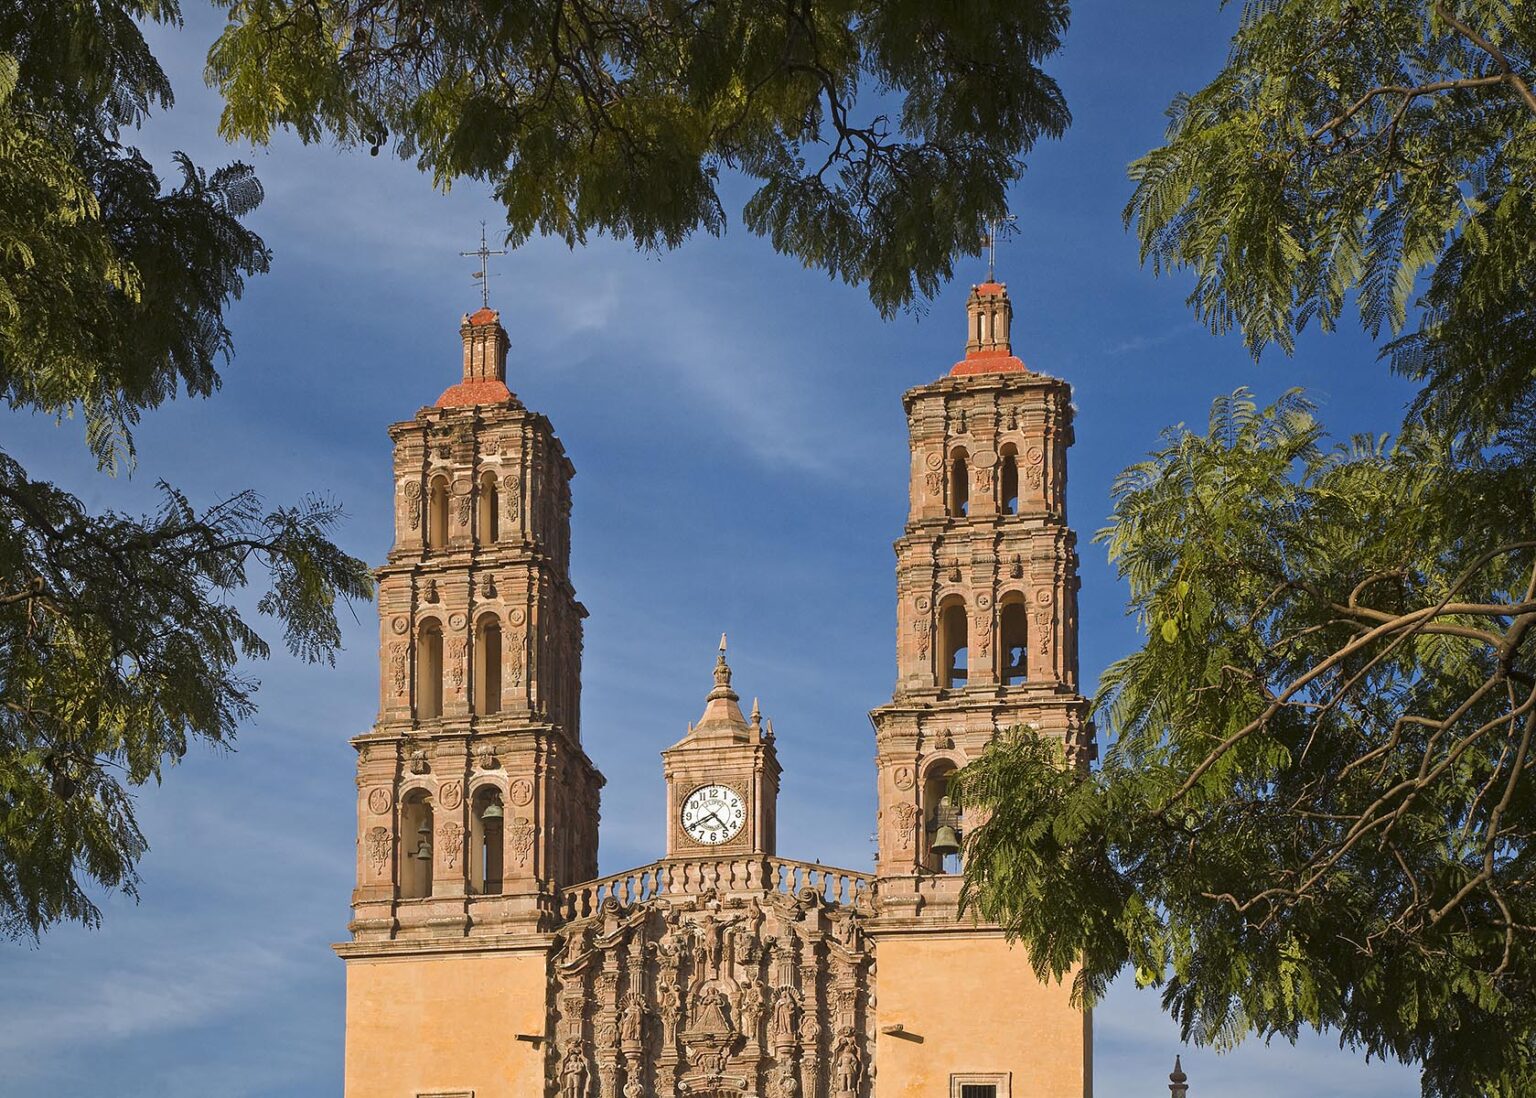 The DOLORES HIDALGO CATHEDRAL was built in the 16th century - GUANAJUATO, MEXICO